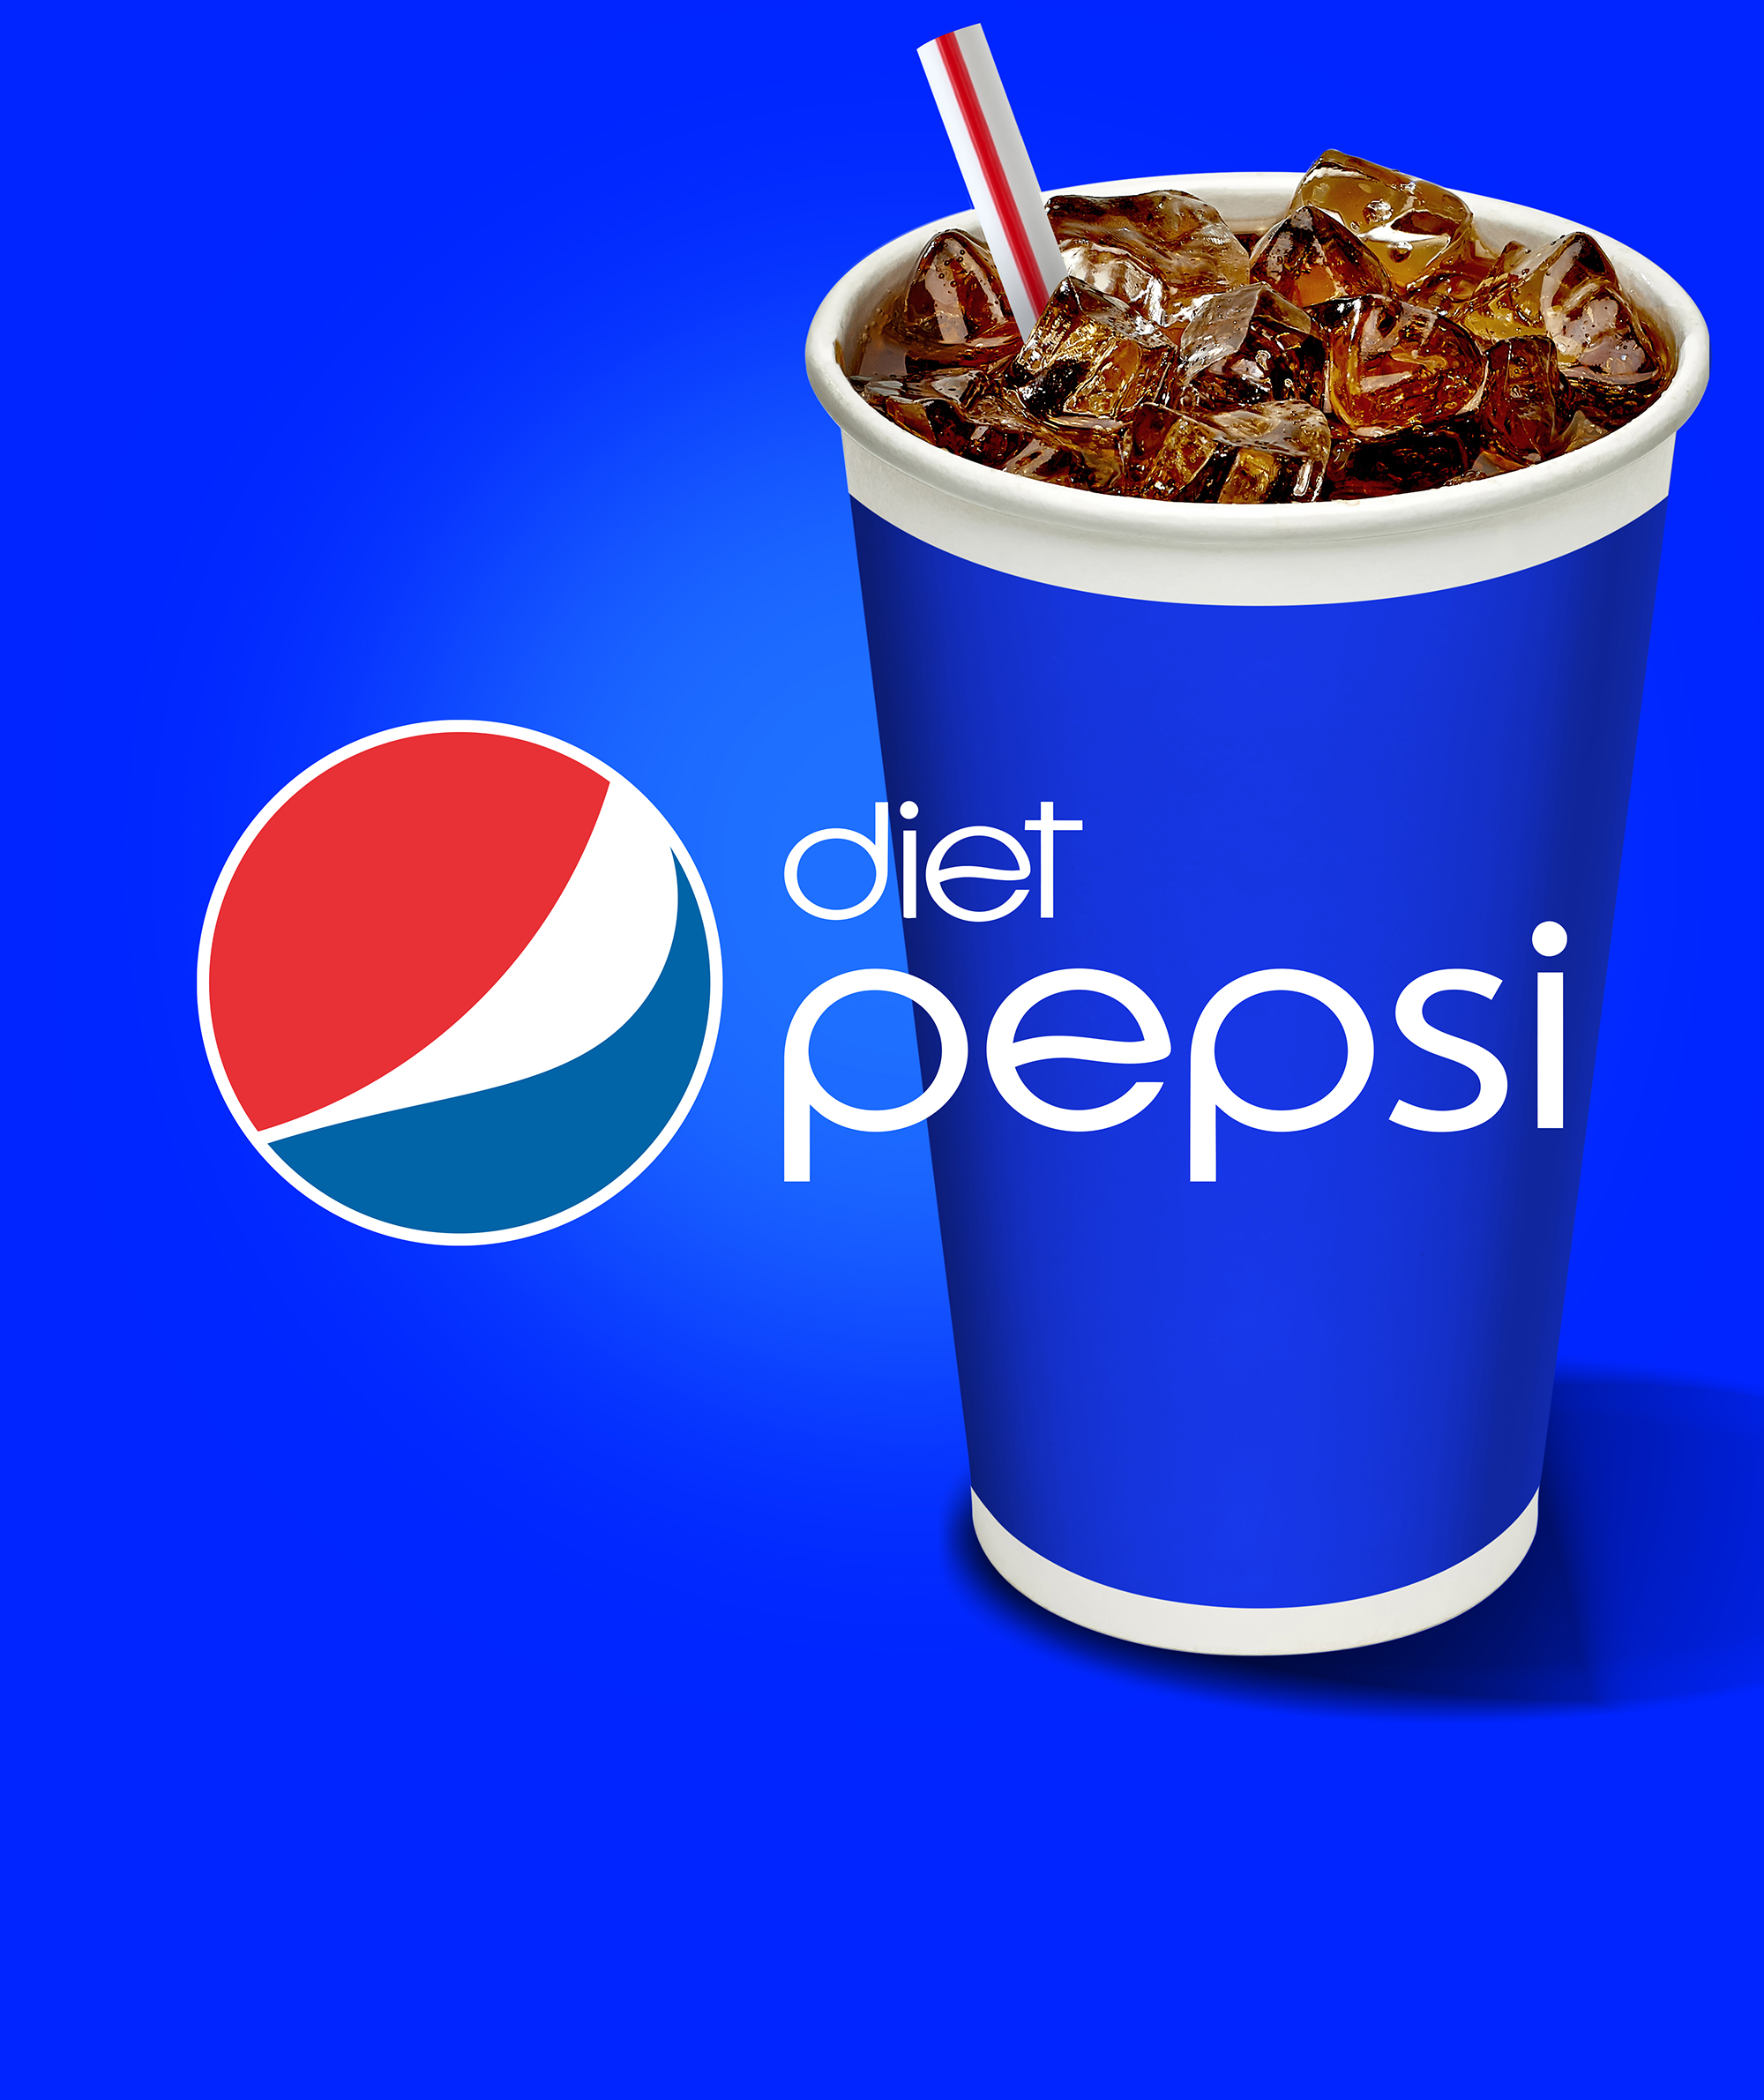 Flavor Smart Nationally Branded Products - Diet Pepsi